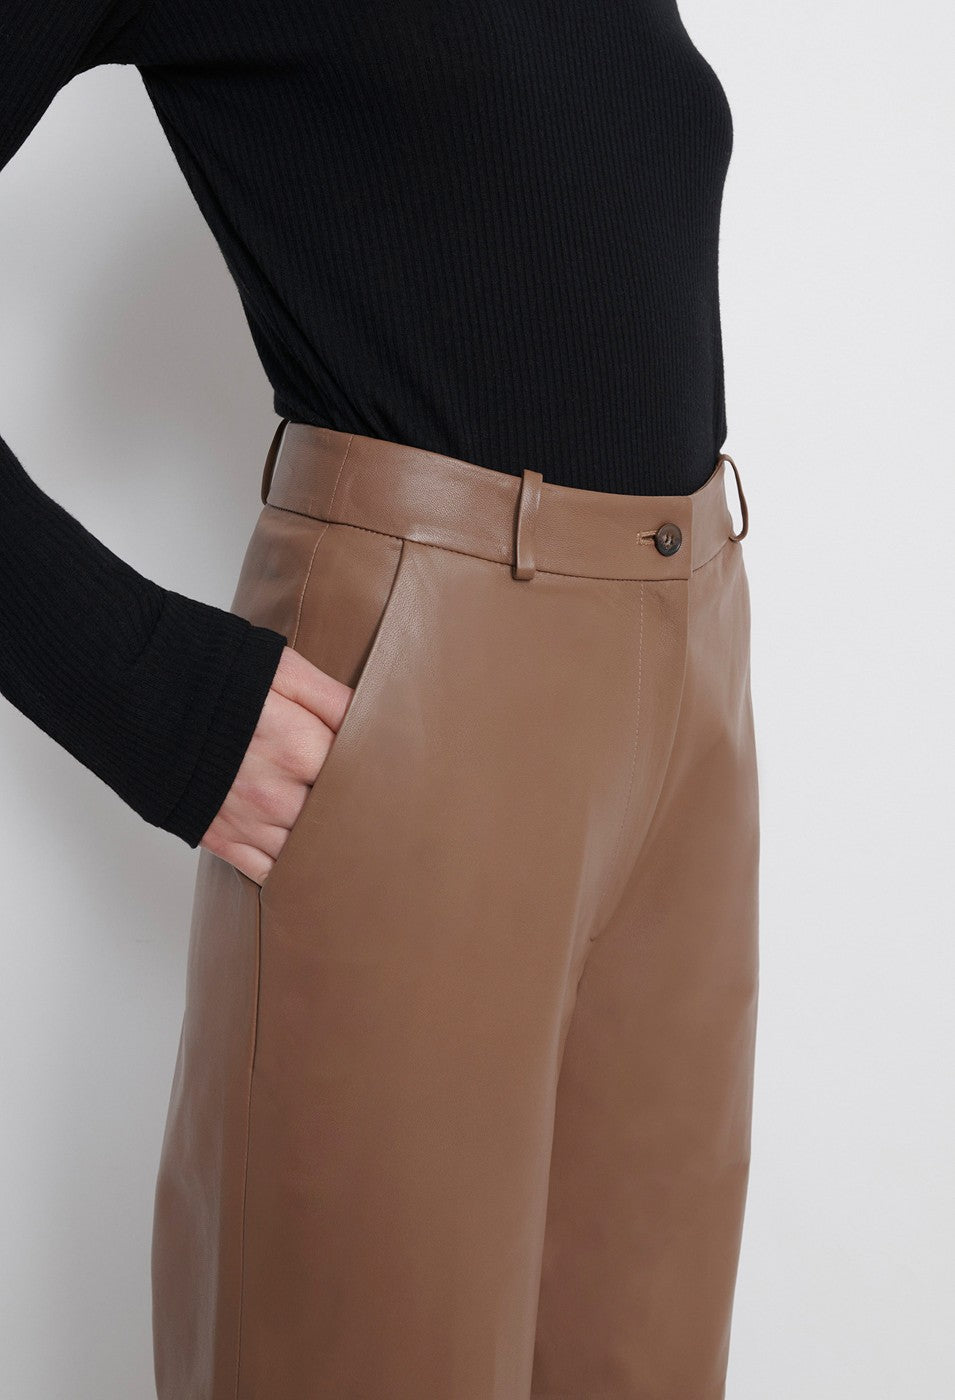 LouLou Studio Noro Leather Pants - Camel